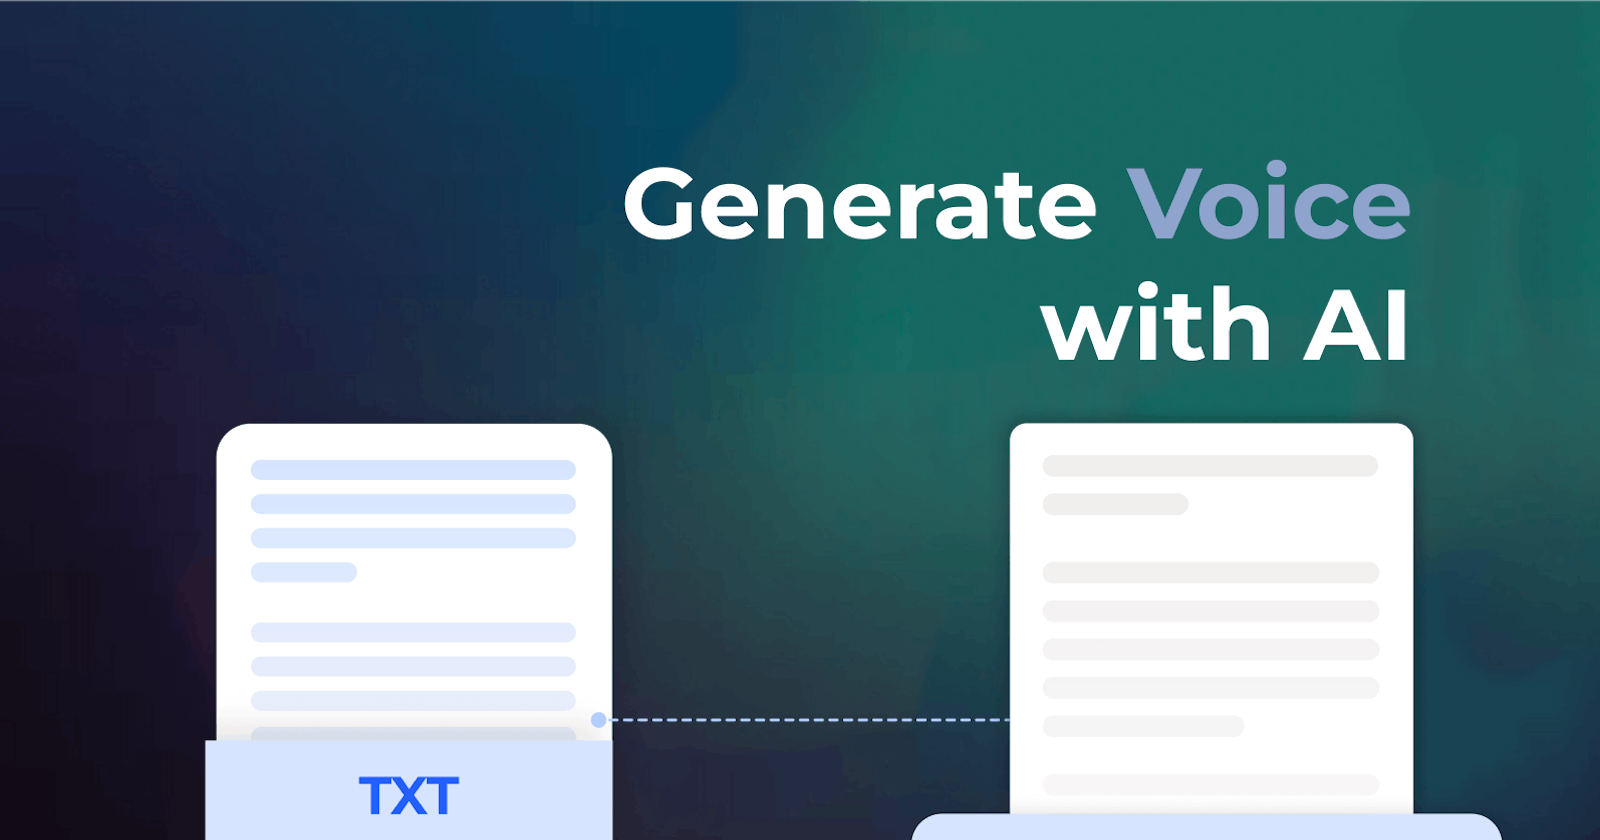 How to generate voice with AI?